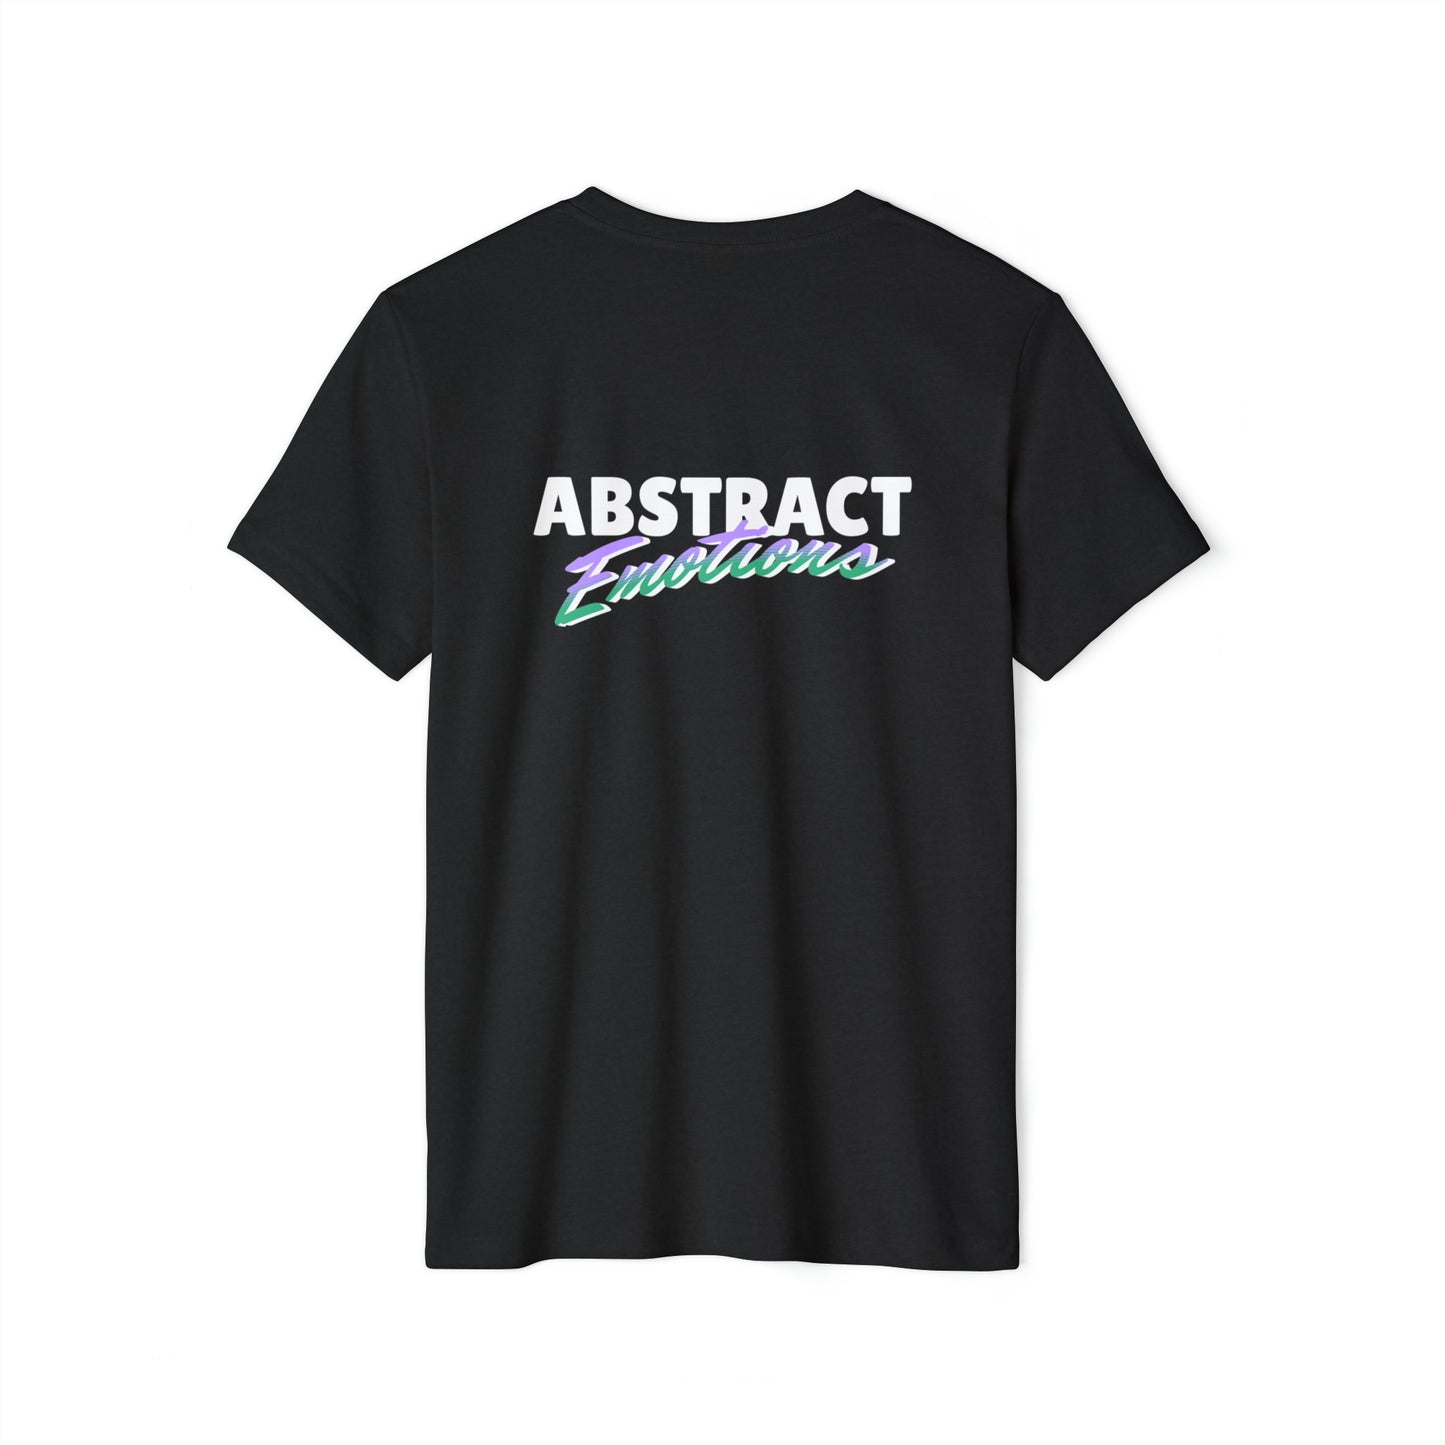 "Abstract Emotions" Retro Style Organic Cotton Tee